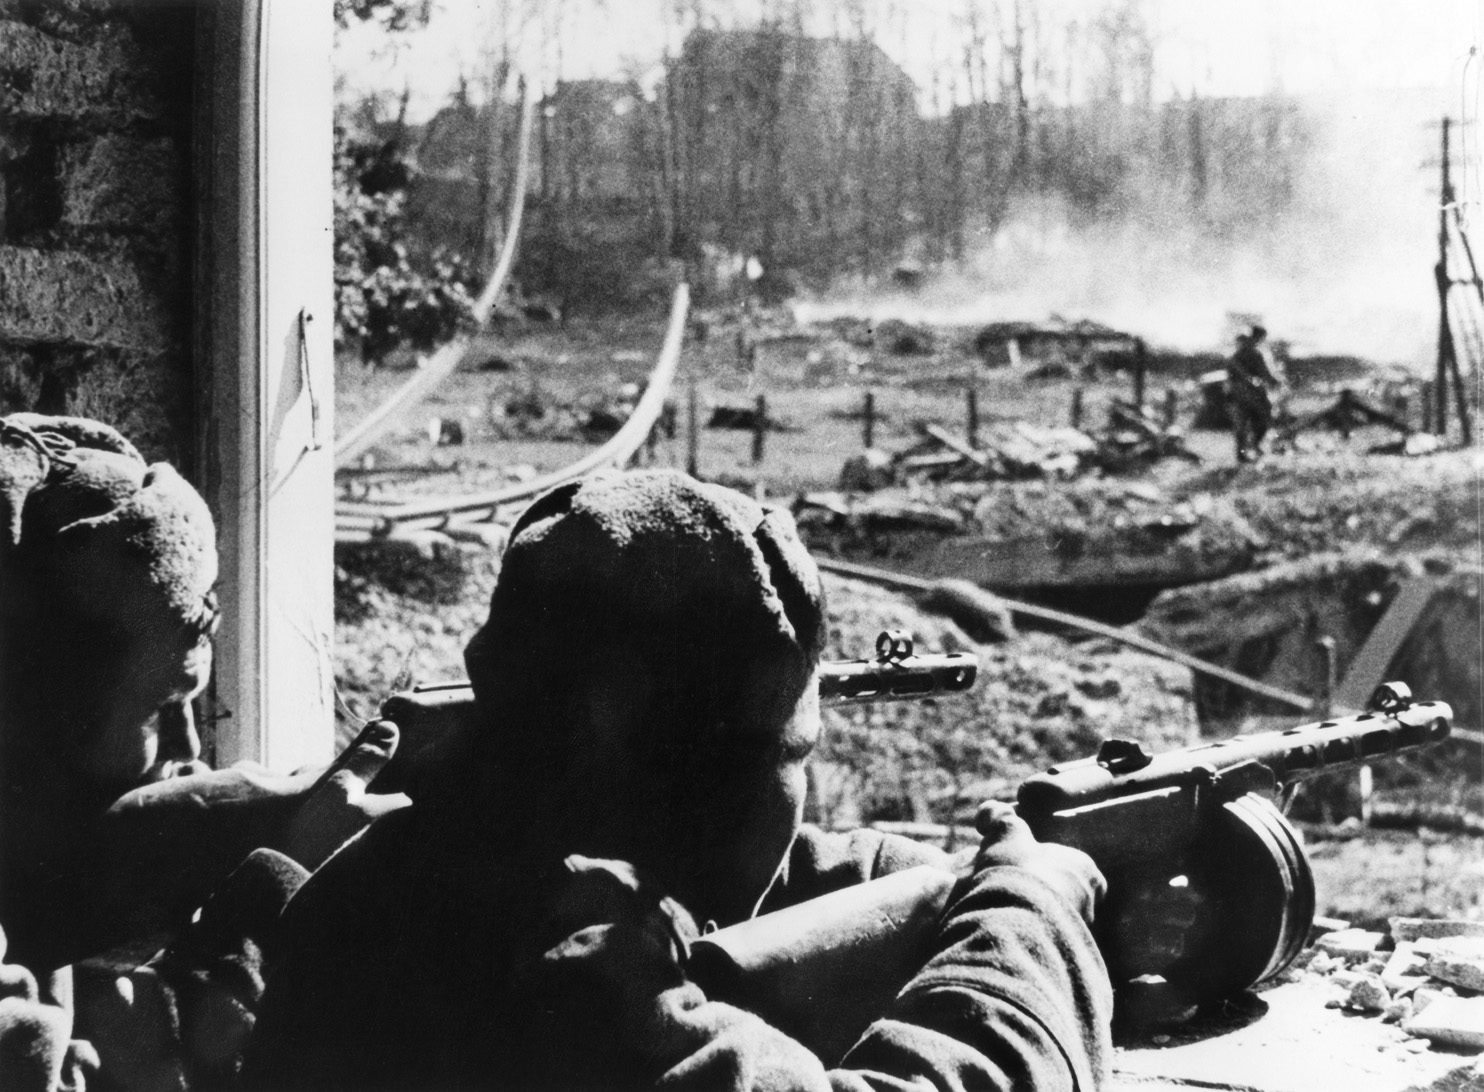 A pair of Red Army soldiers aims their automatic weapons at German positions while awaiting orders to move forward during fighting in the suburbs of Königsberg in April 1945.